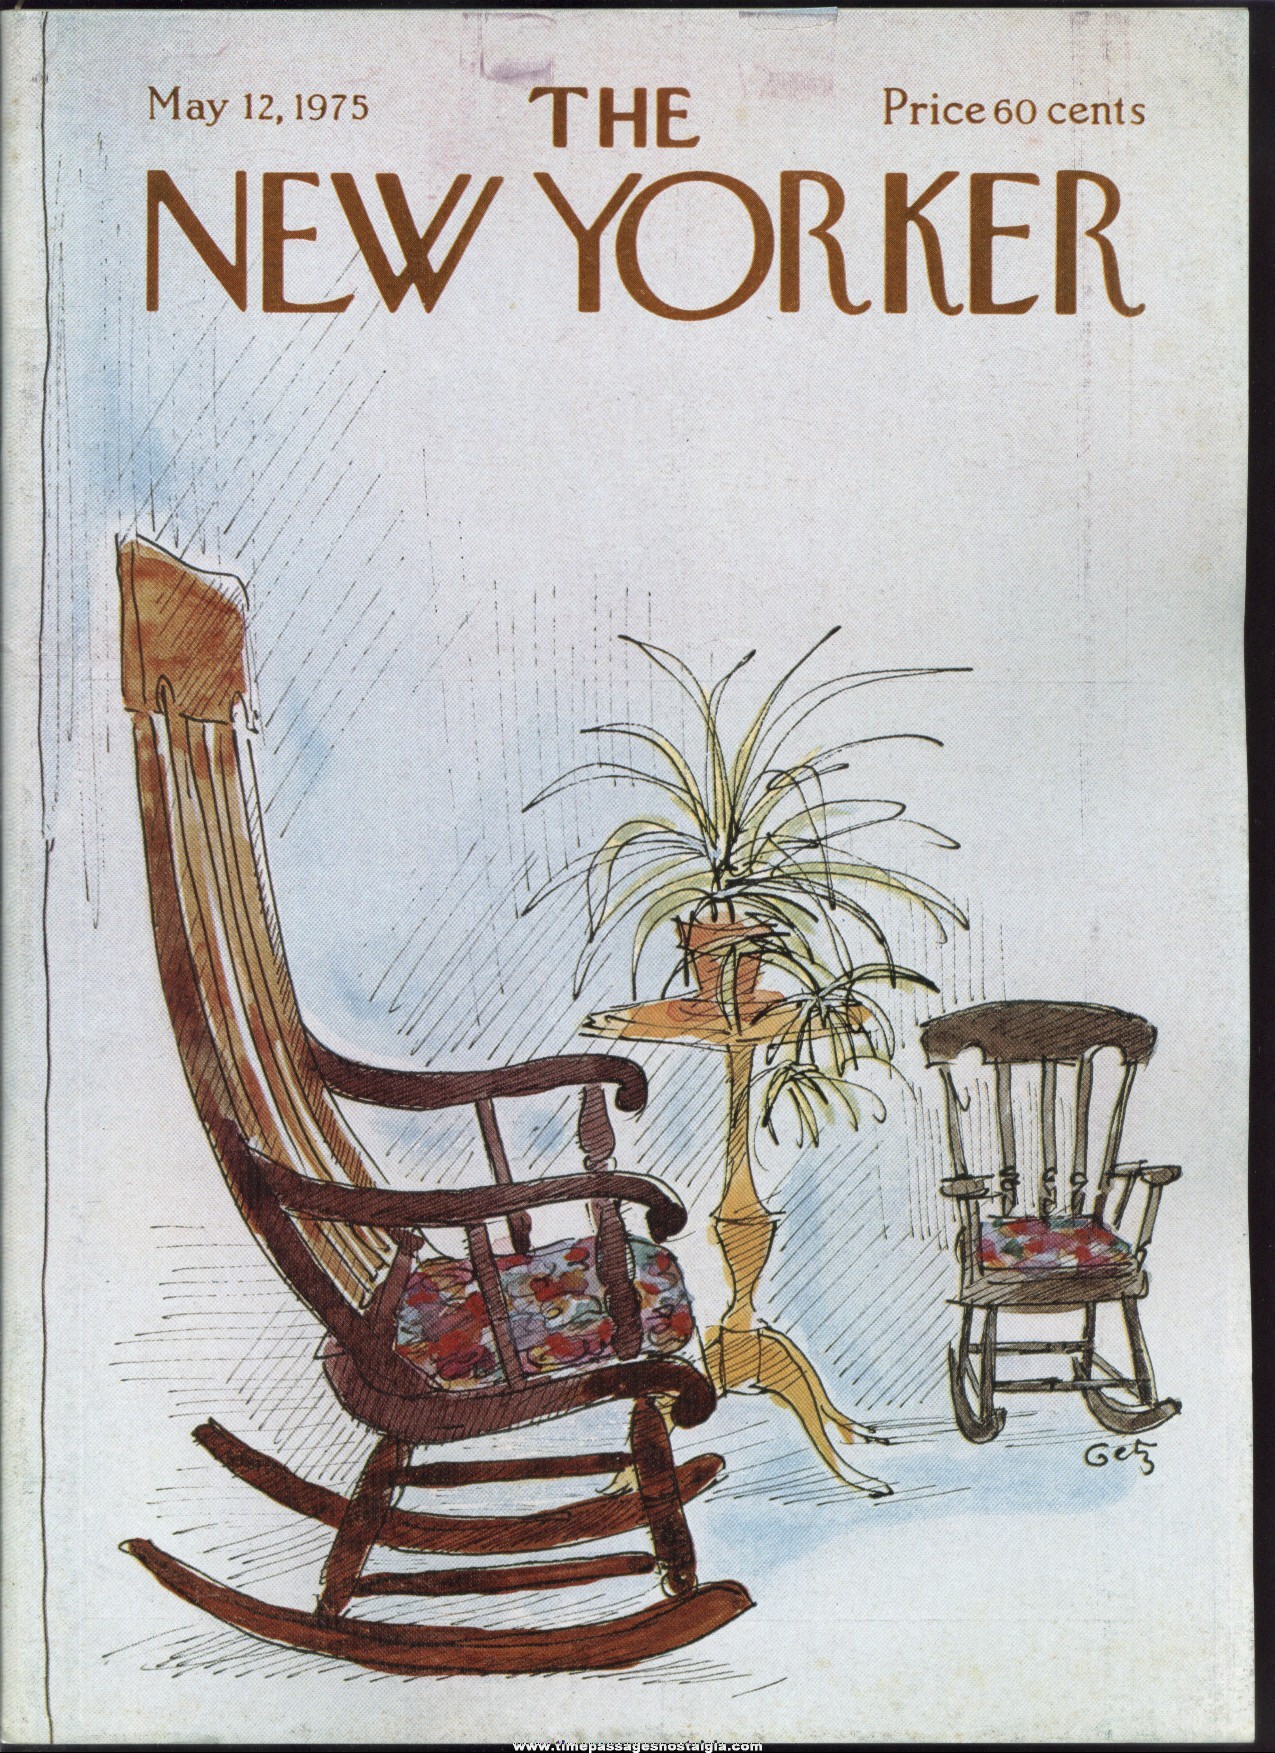 New Yorker Magazine - May 12, 1975 - Cover by Arthur Getz